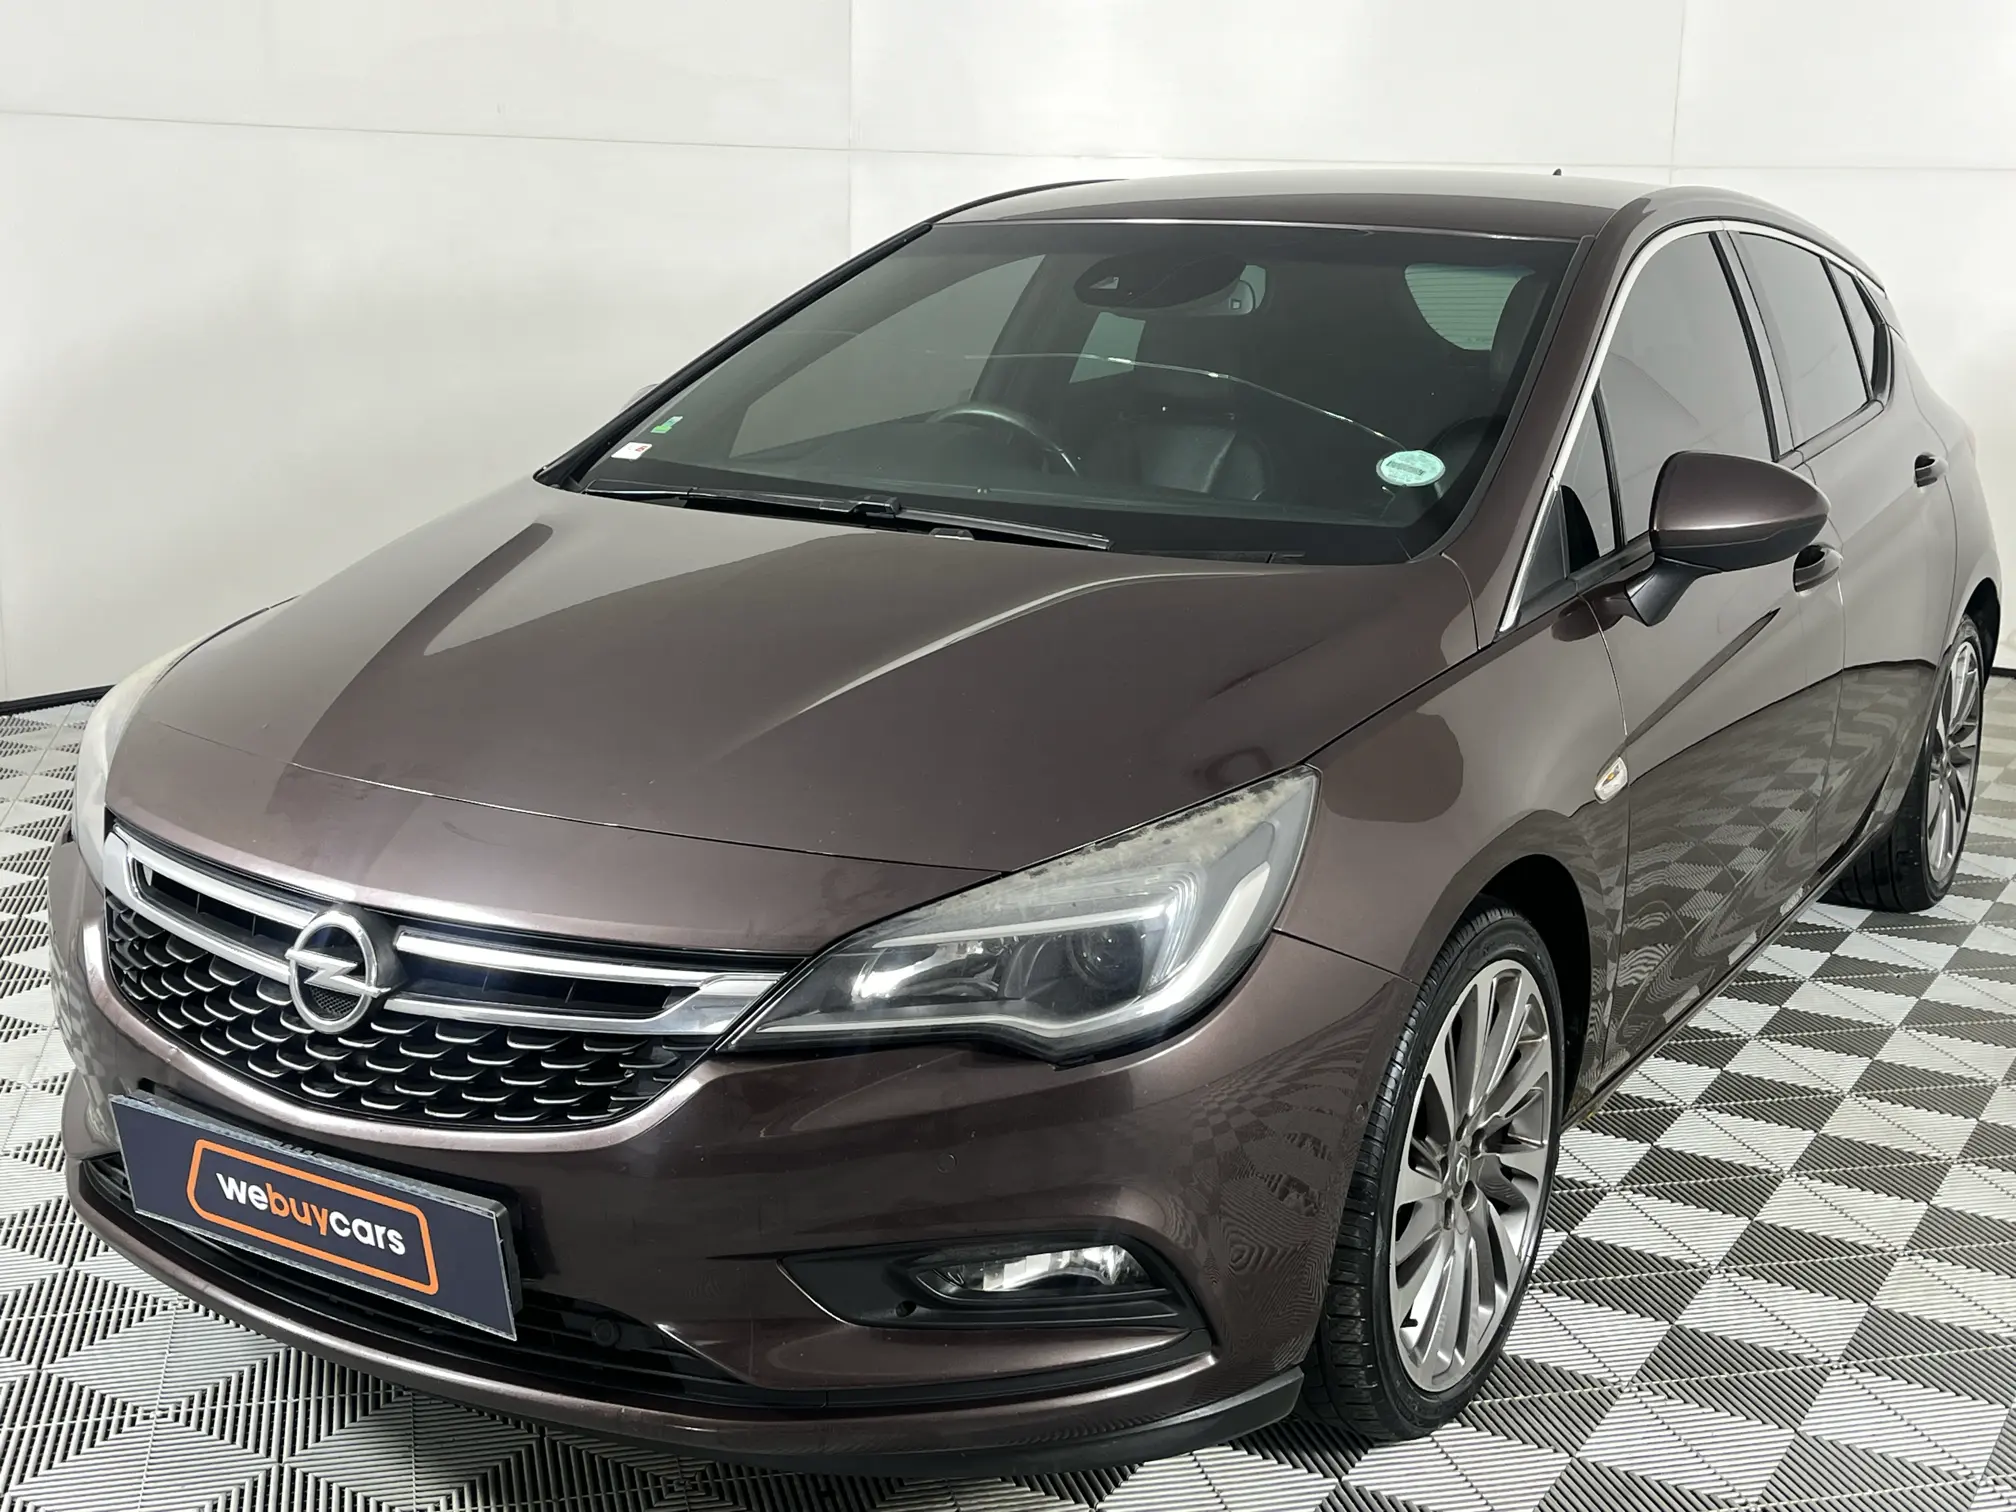 2017 Opel Astra 1.6T Sport Plus (5dr)